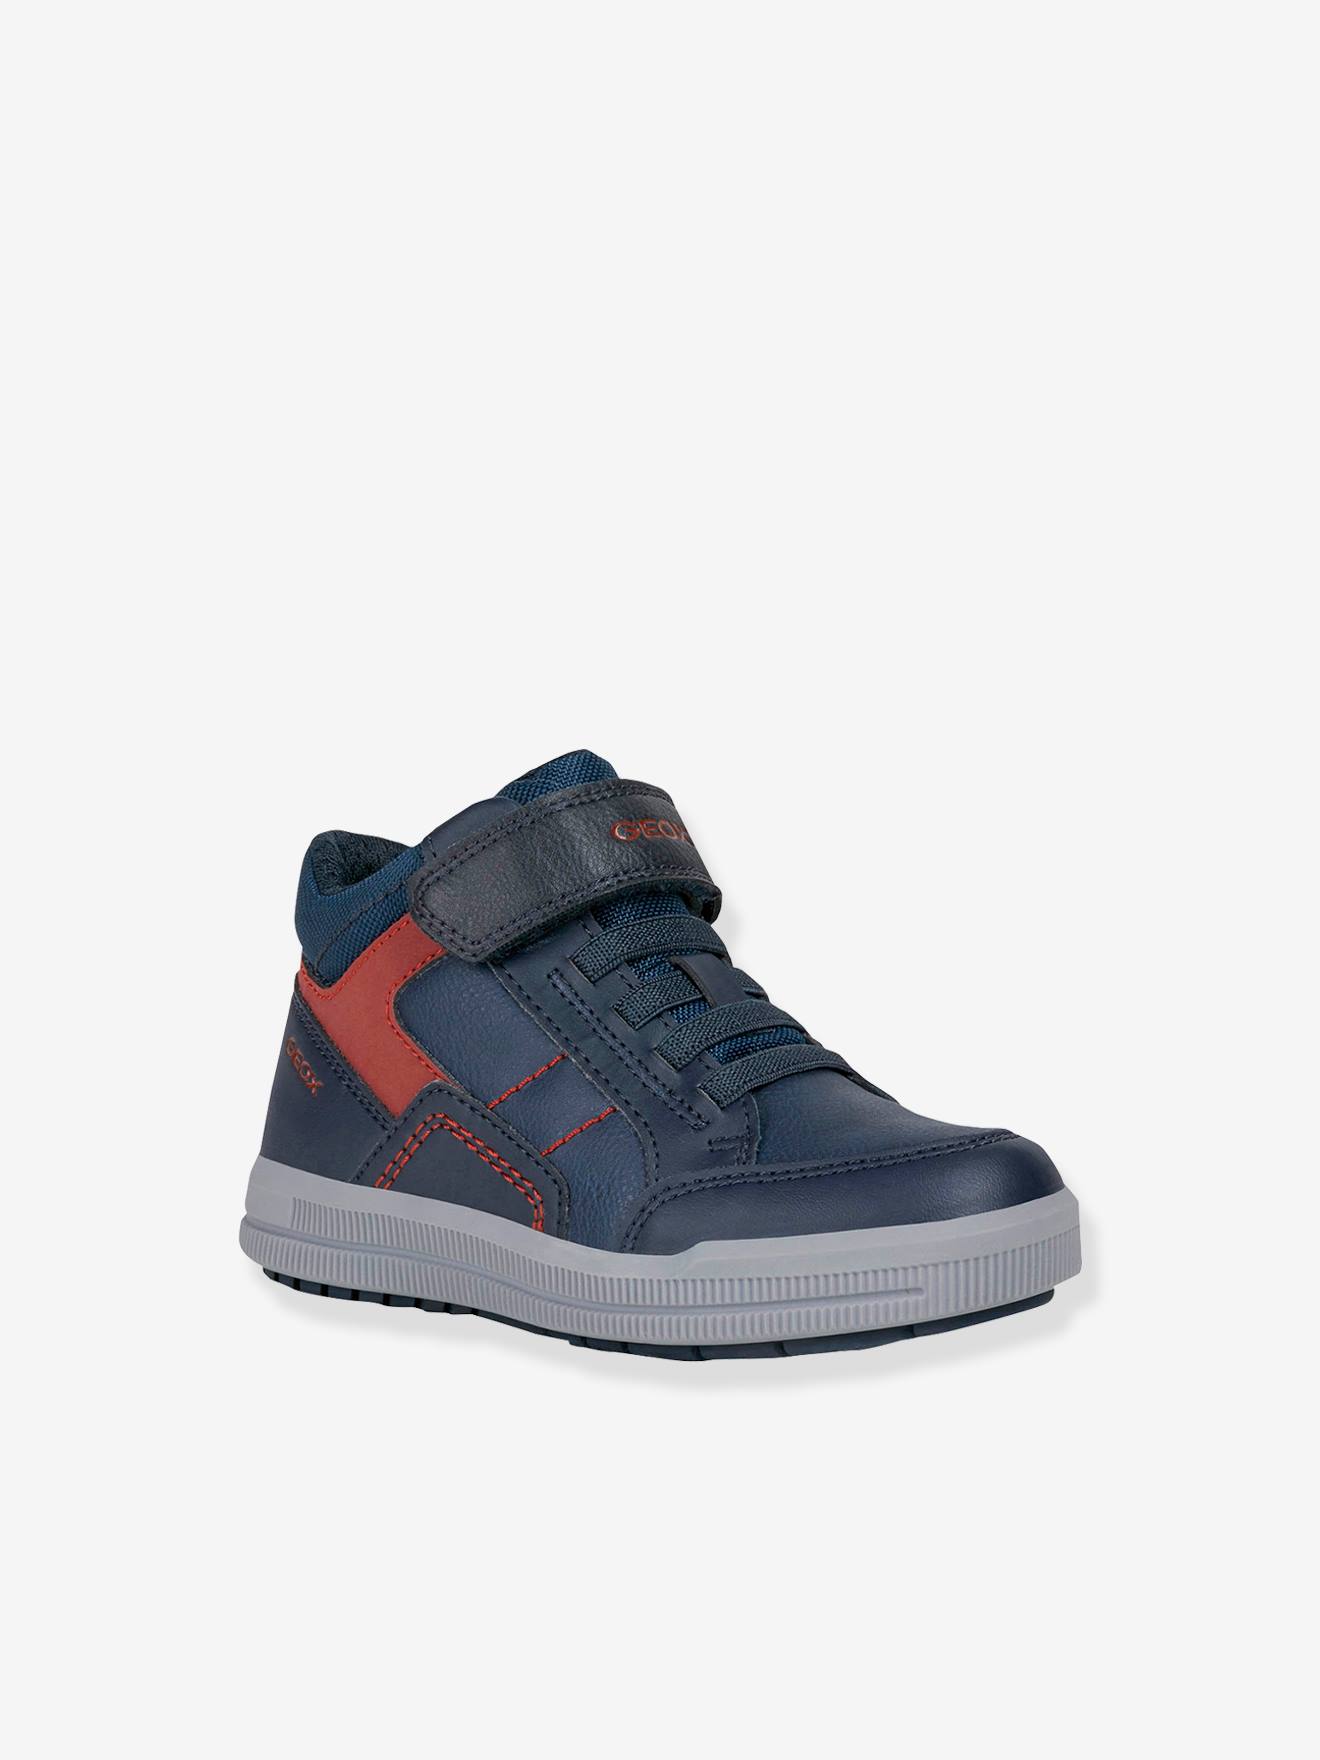 impulso sacudir diluido High Top Trainers for Boys, J Arzach Boy by GEOX® - dark blue, Shoes